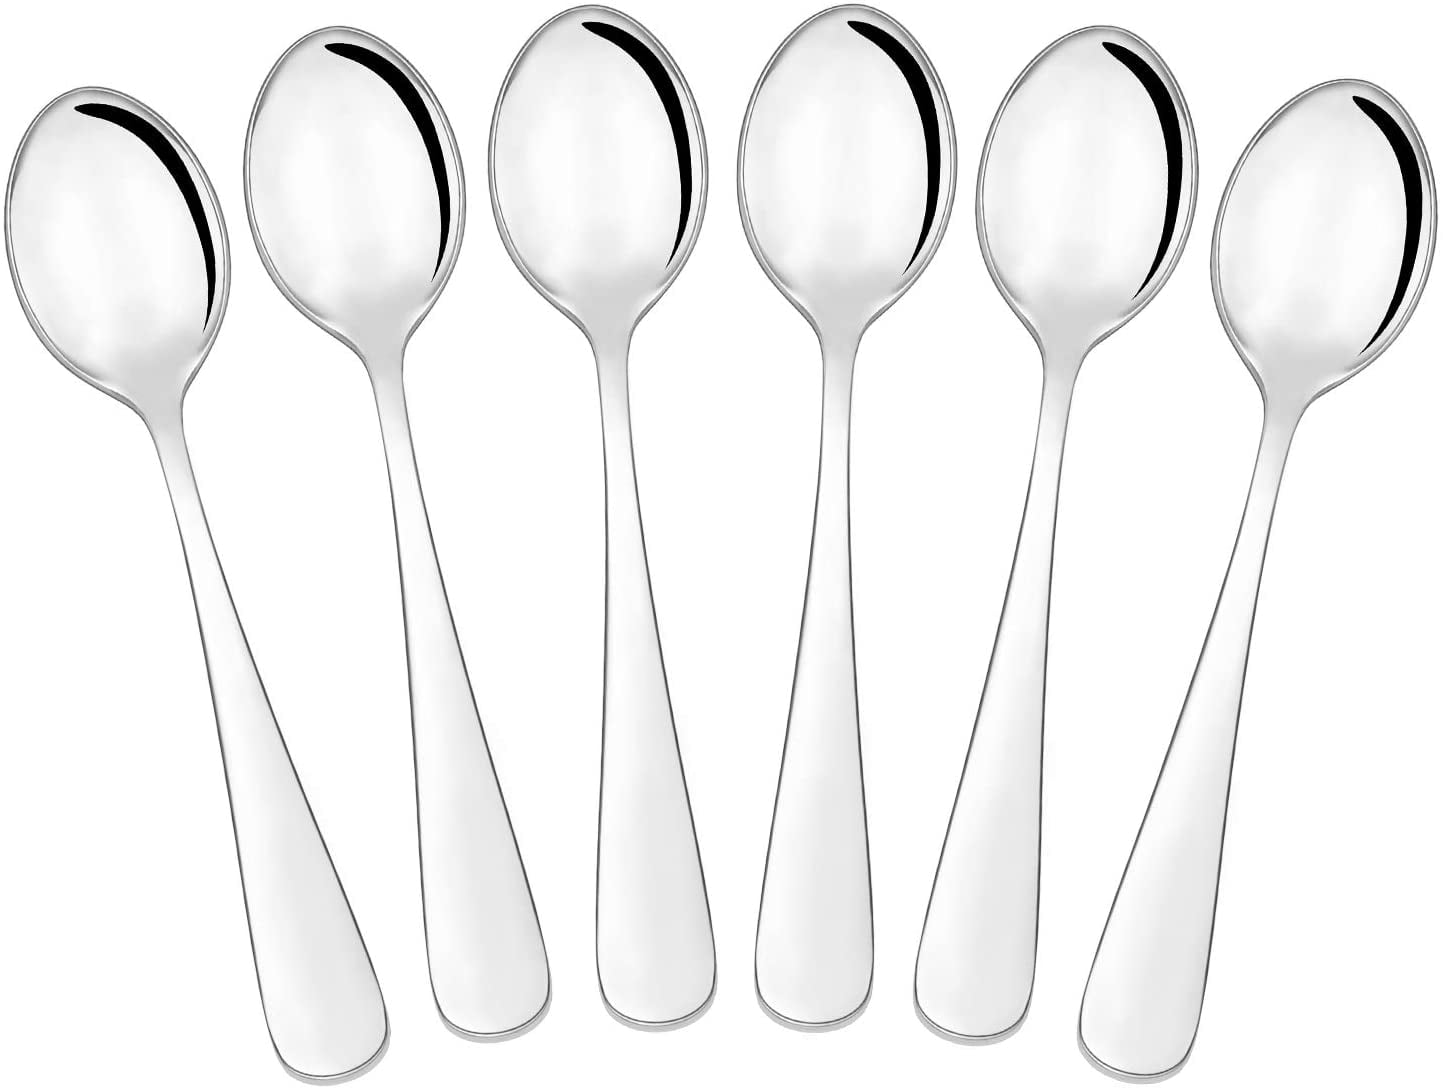 Buyer Star 12-Pieces Silver Stainless Steel Teaspoons 5.5-Inch Mini Coffee Spoons Metal Small Demitasse Espresso Spoons